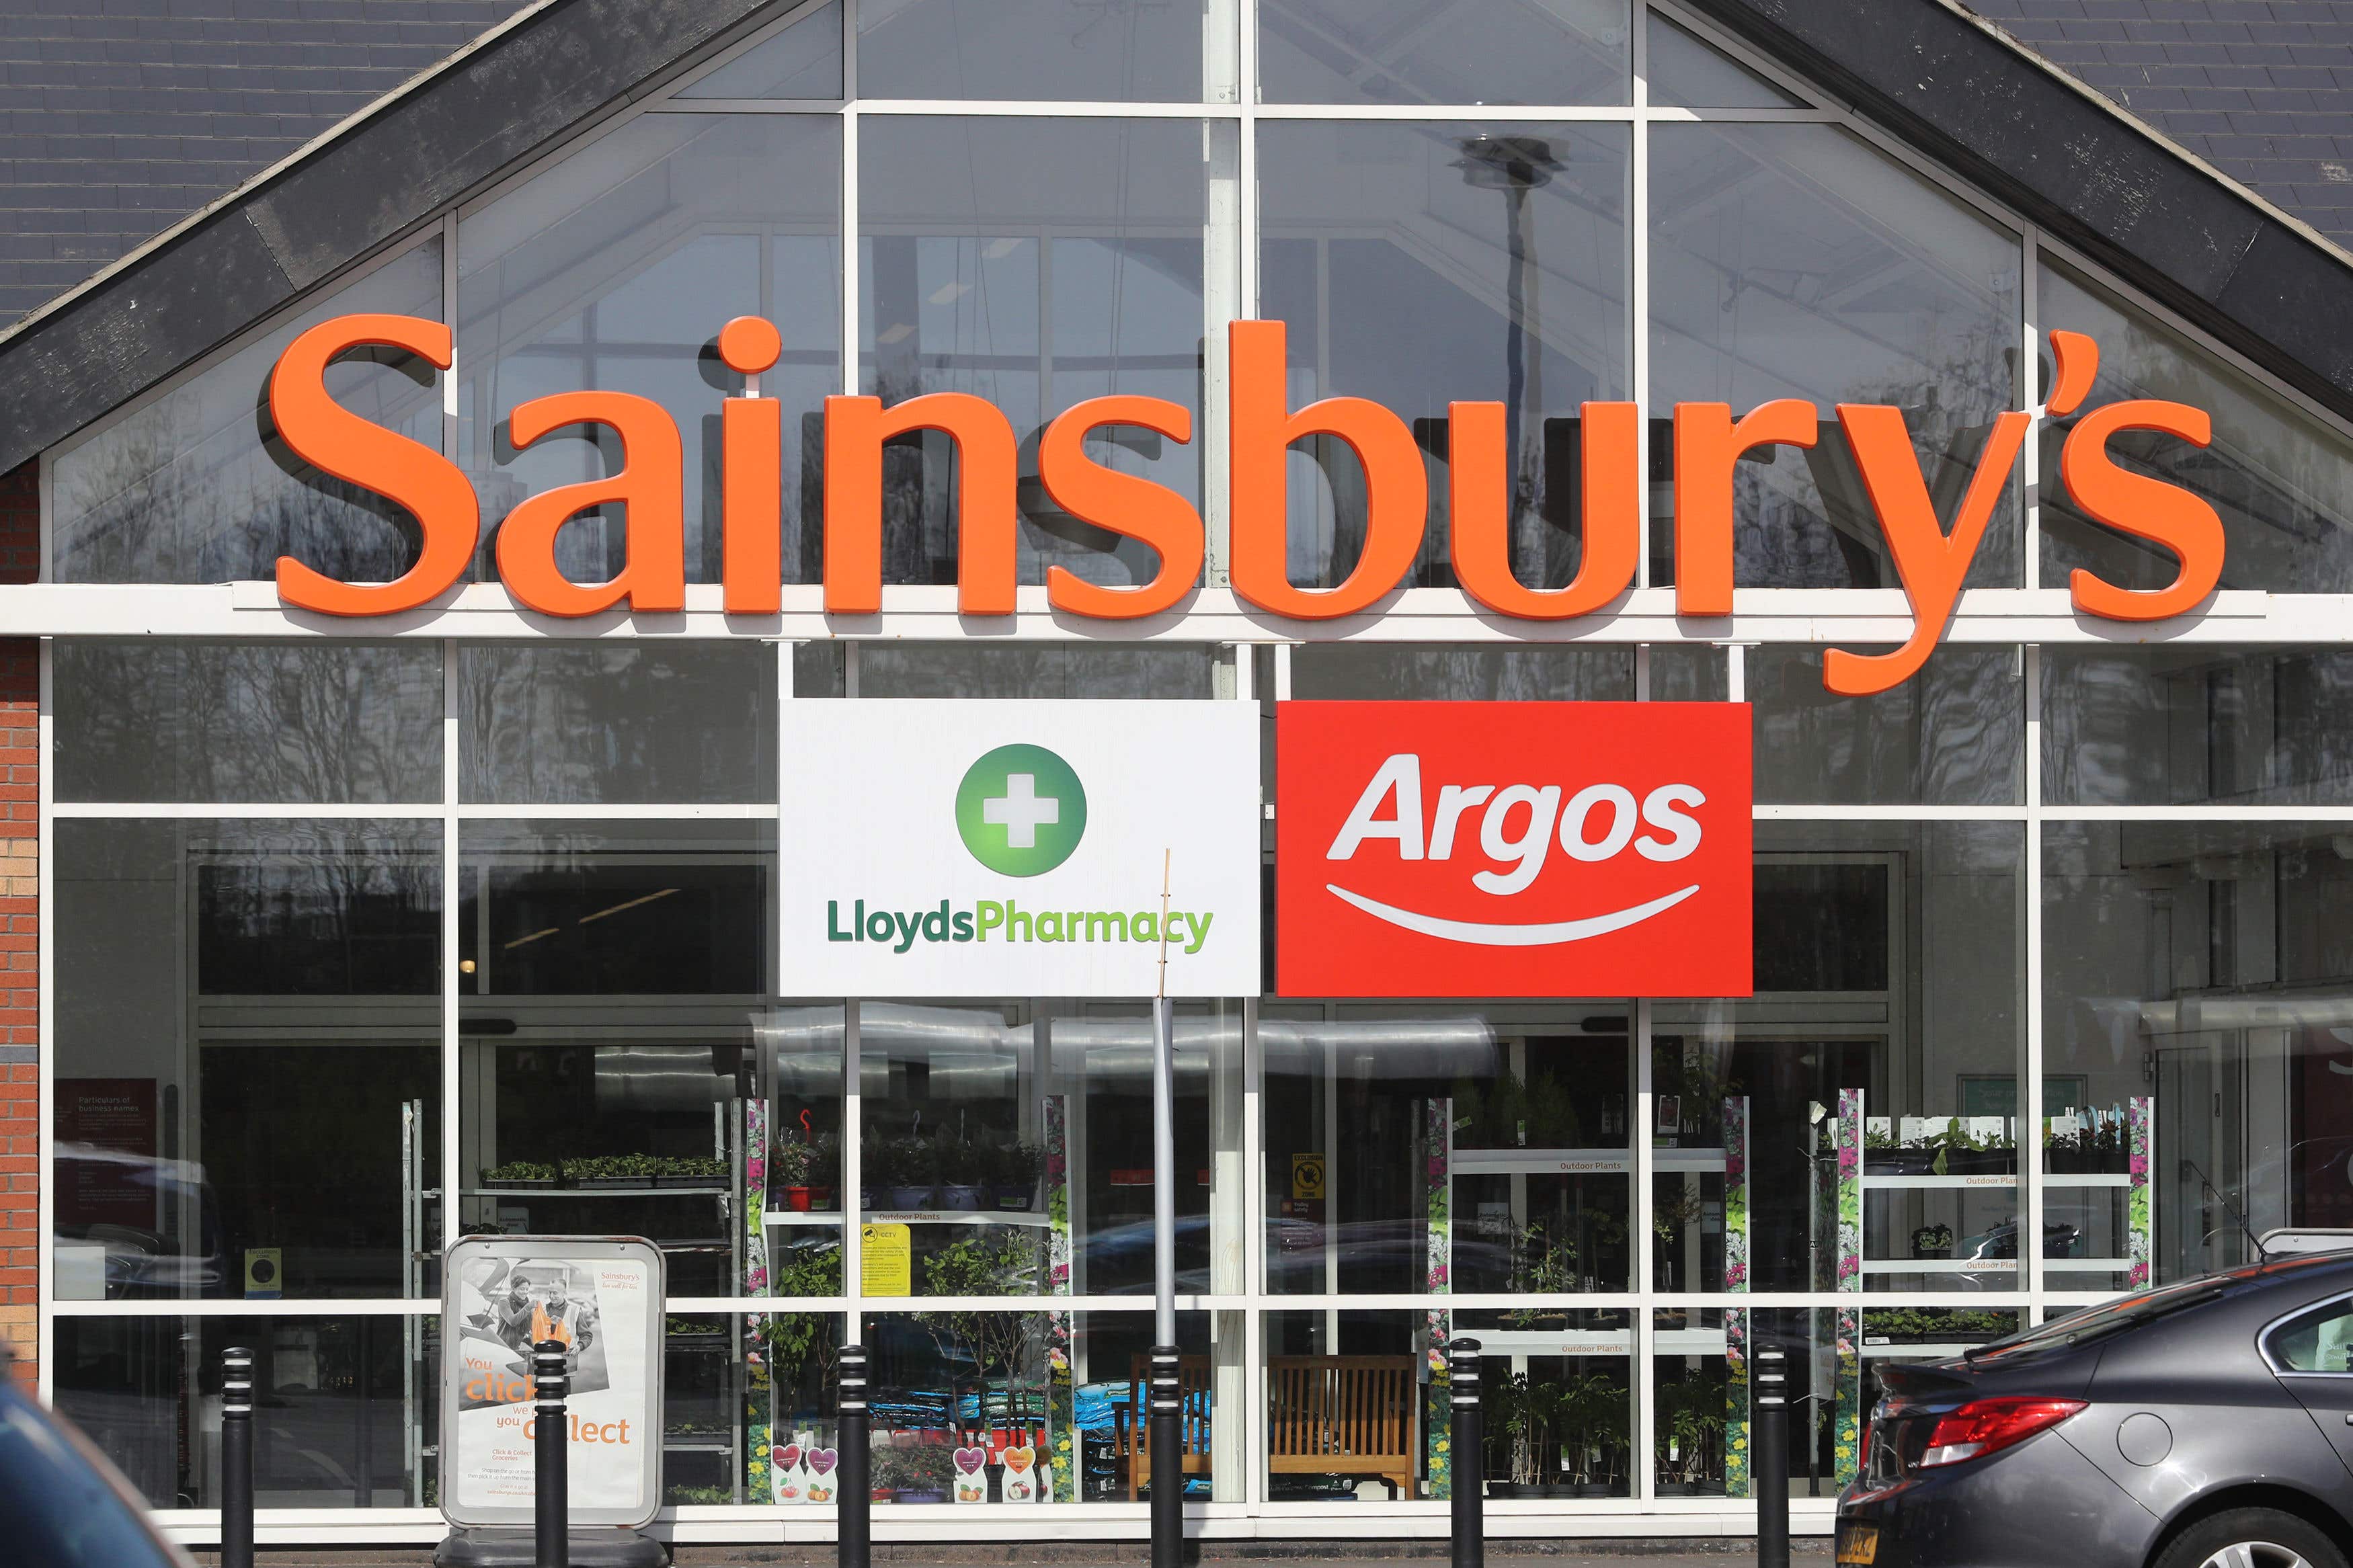 Supermarket Sainsbury’s has revealed falling annual profits as it took a hit from soaring costs and held back price rises for shoppers, but said it was “determined to battle inflation for our customers”.